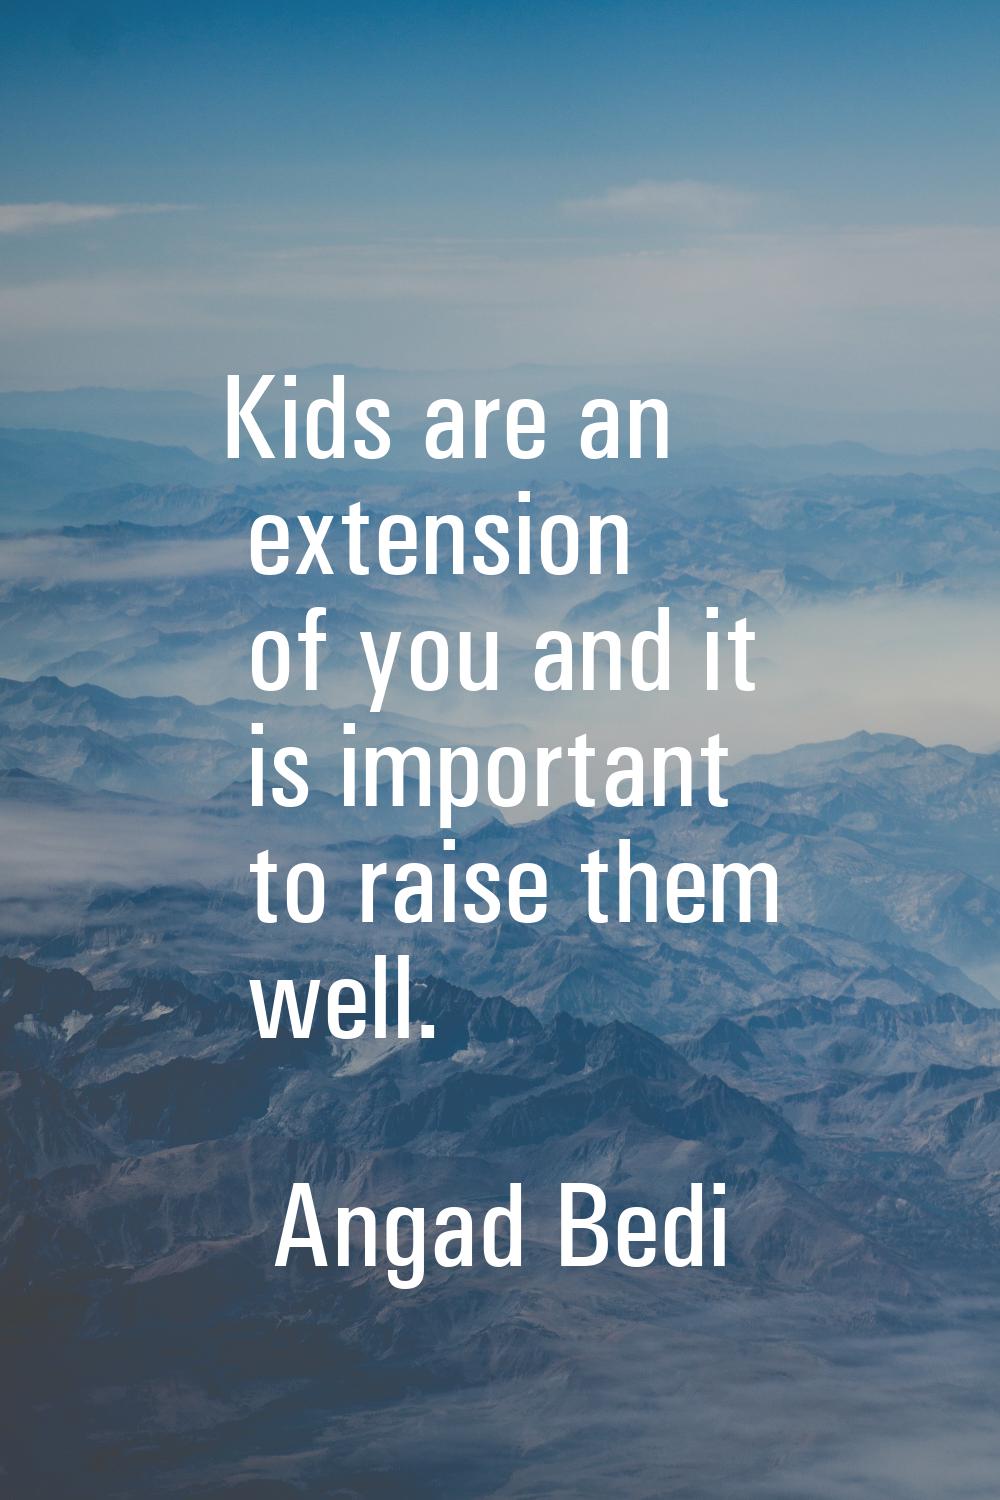 Kids are an extension of you and it is important to raise them well.